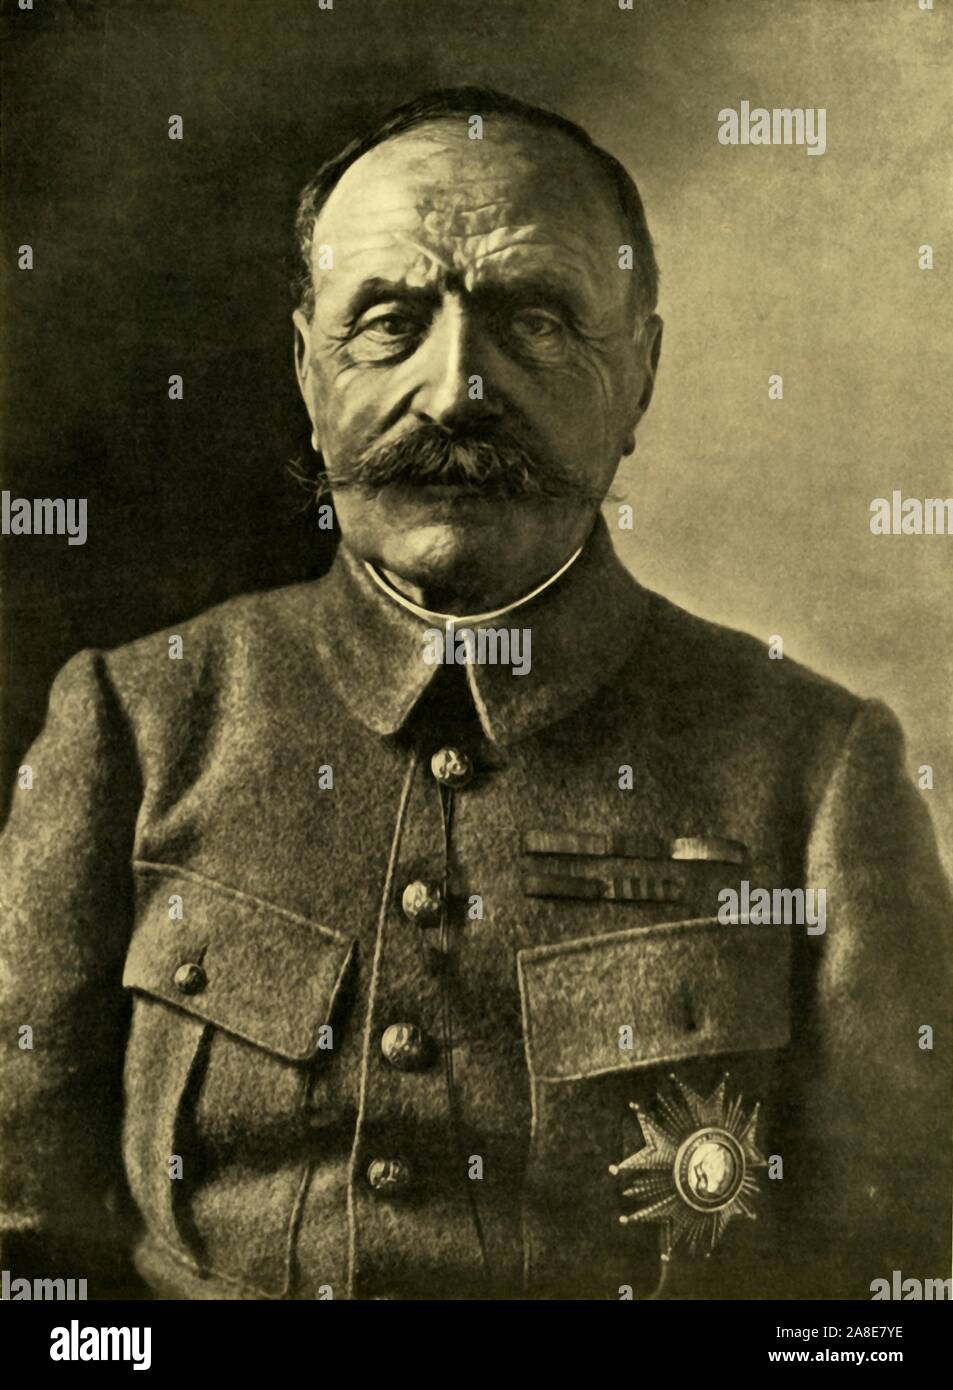 'Marshal Foch, Generalissimo of the Allied Armies on the Western Front', c1920. Portrait of French soldier Ferdinand Foch (1851-1929), military theorist and writer who served as the Supreme Allied Commander during the First World War. From &quot;The Great World War: A History&quot;, Volume IX, edited by Frank A Mumby. [The Gresham Publishing Company Ltd, London, c1920] Stock Photo